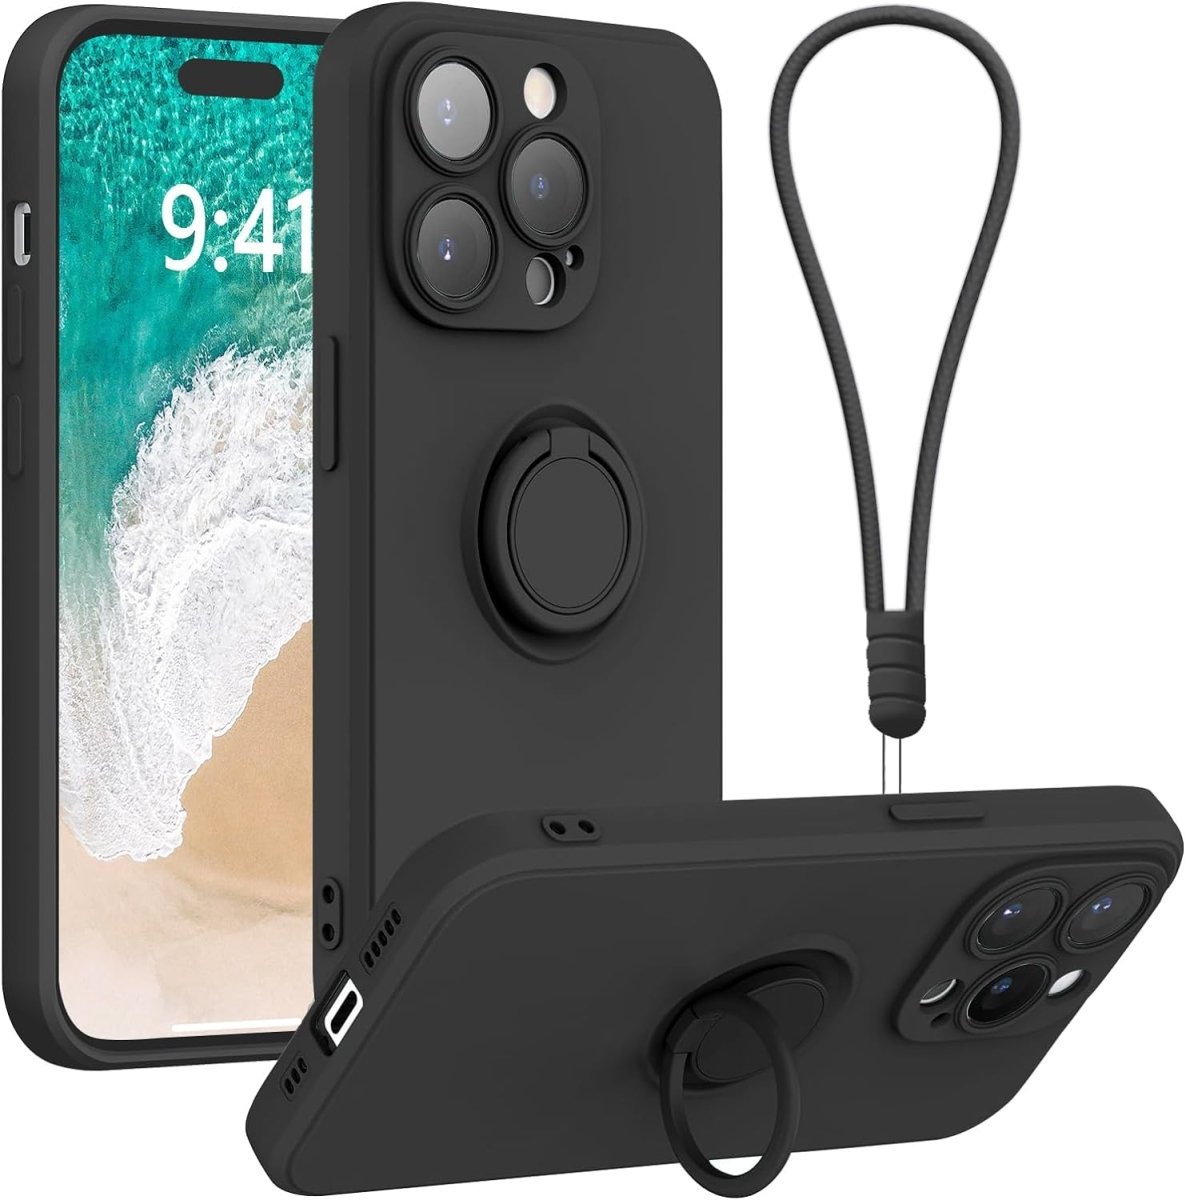 Black Shockproof Silicone Case For iPhone With Ring And Lanyard  Black iPhone 11 Accessories Gifts UK